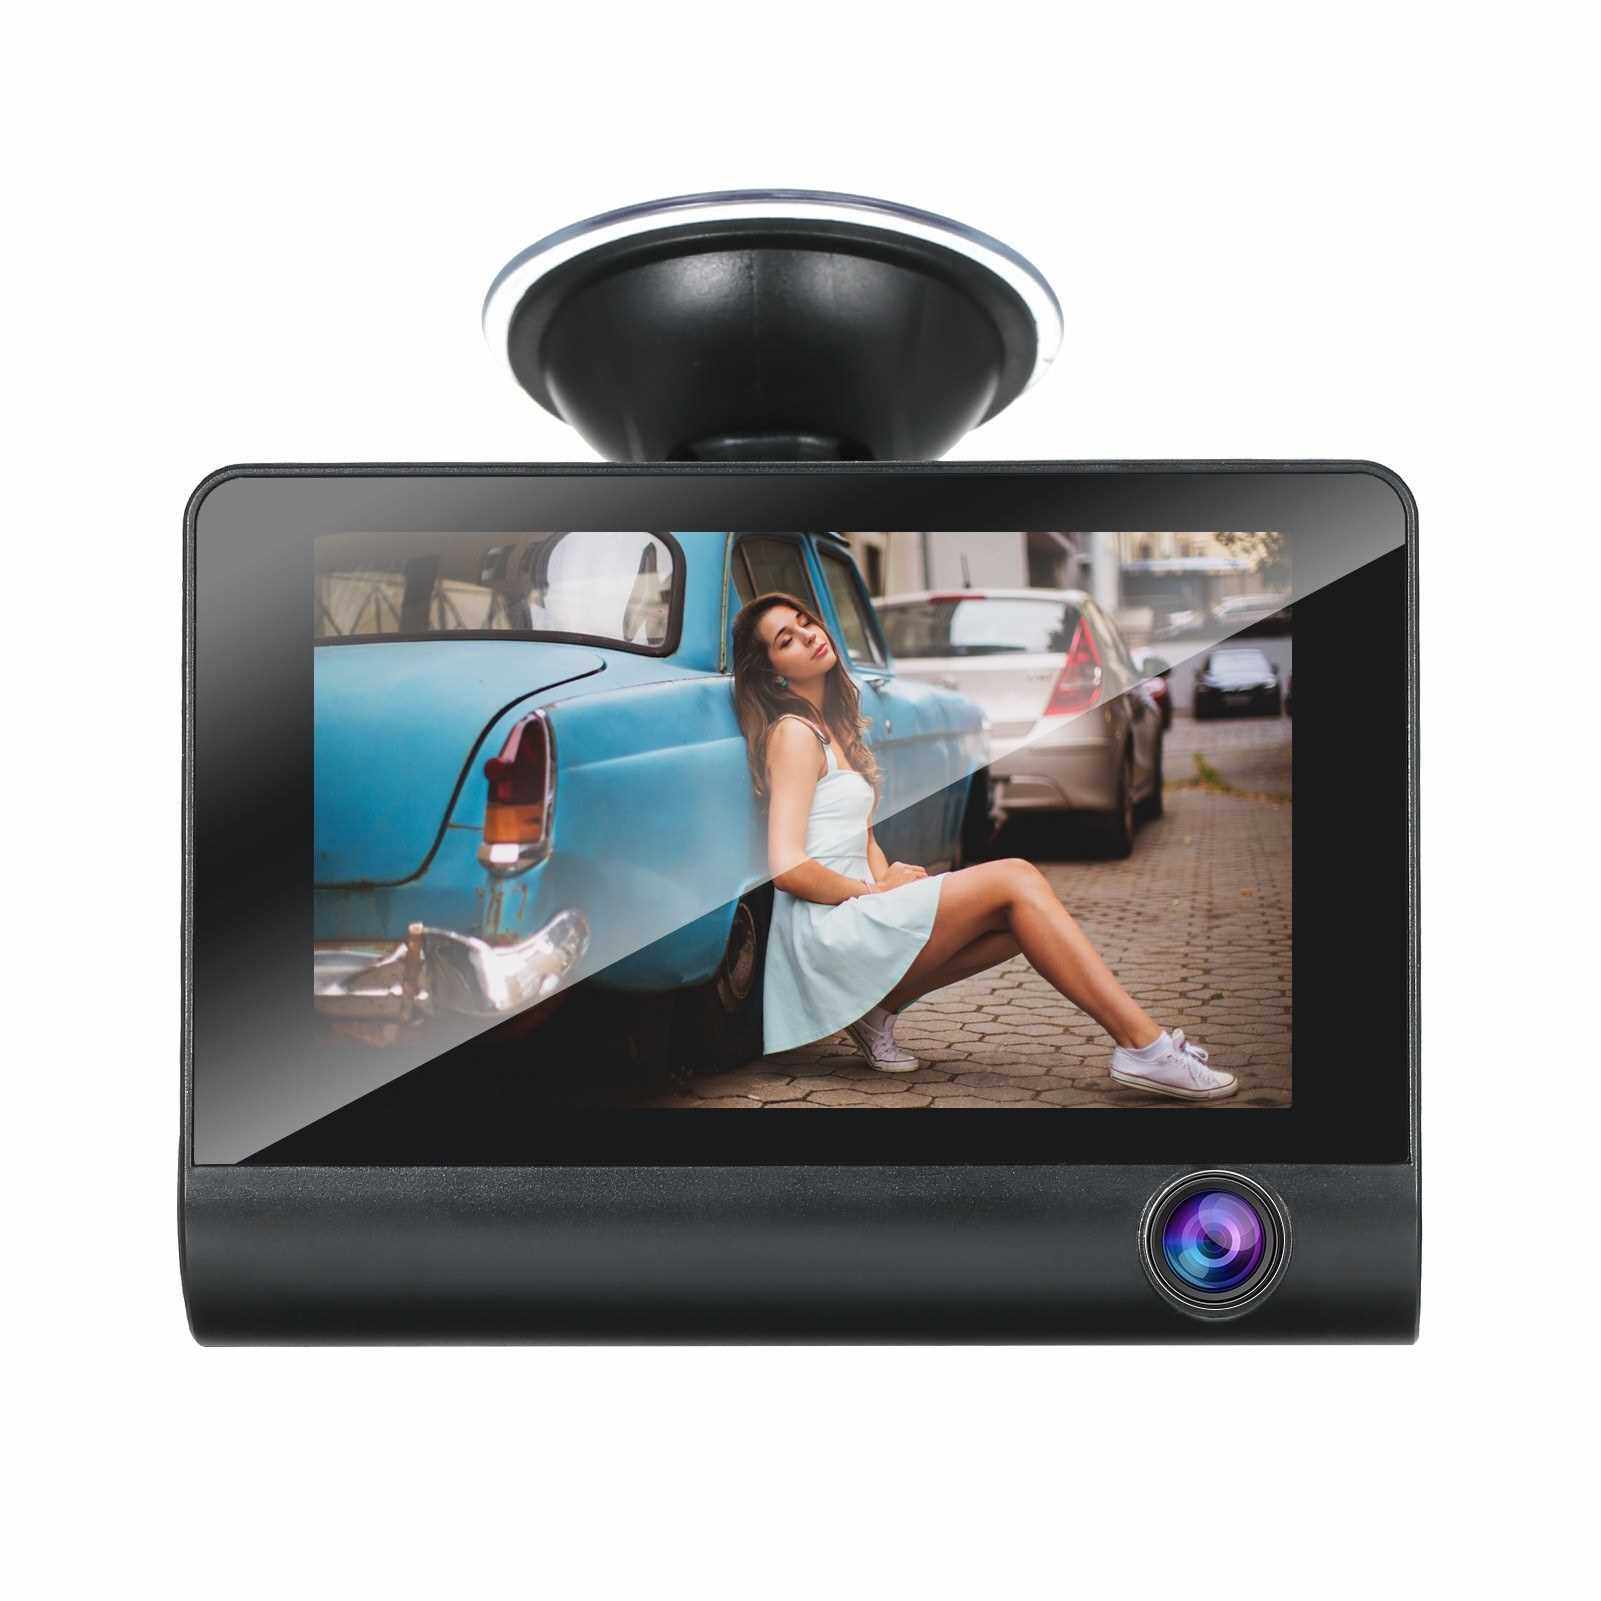 People's Choice 1080P Full HD Dash Cam with 4 Inch IPS Screen Front and Rear Dual Dash Camera Driving Recorder Wide Angle Vision G-sensor Loop Recording Motion Detection Parking Monitor Playback Viewing Off-screen & Reversing Video Dashboard Camera 8